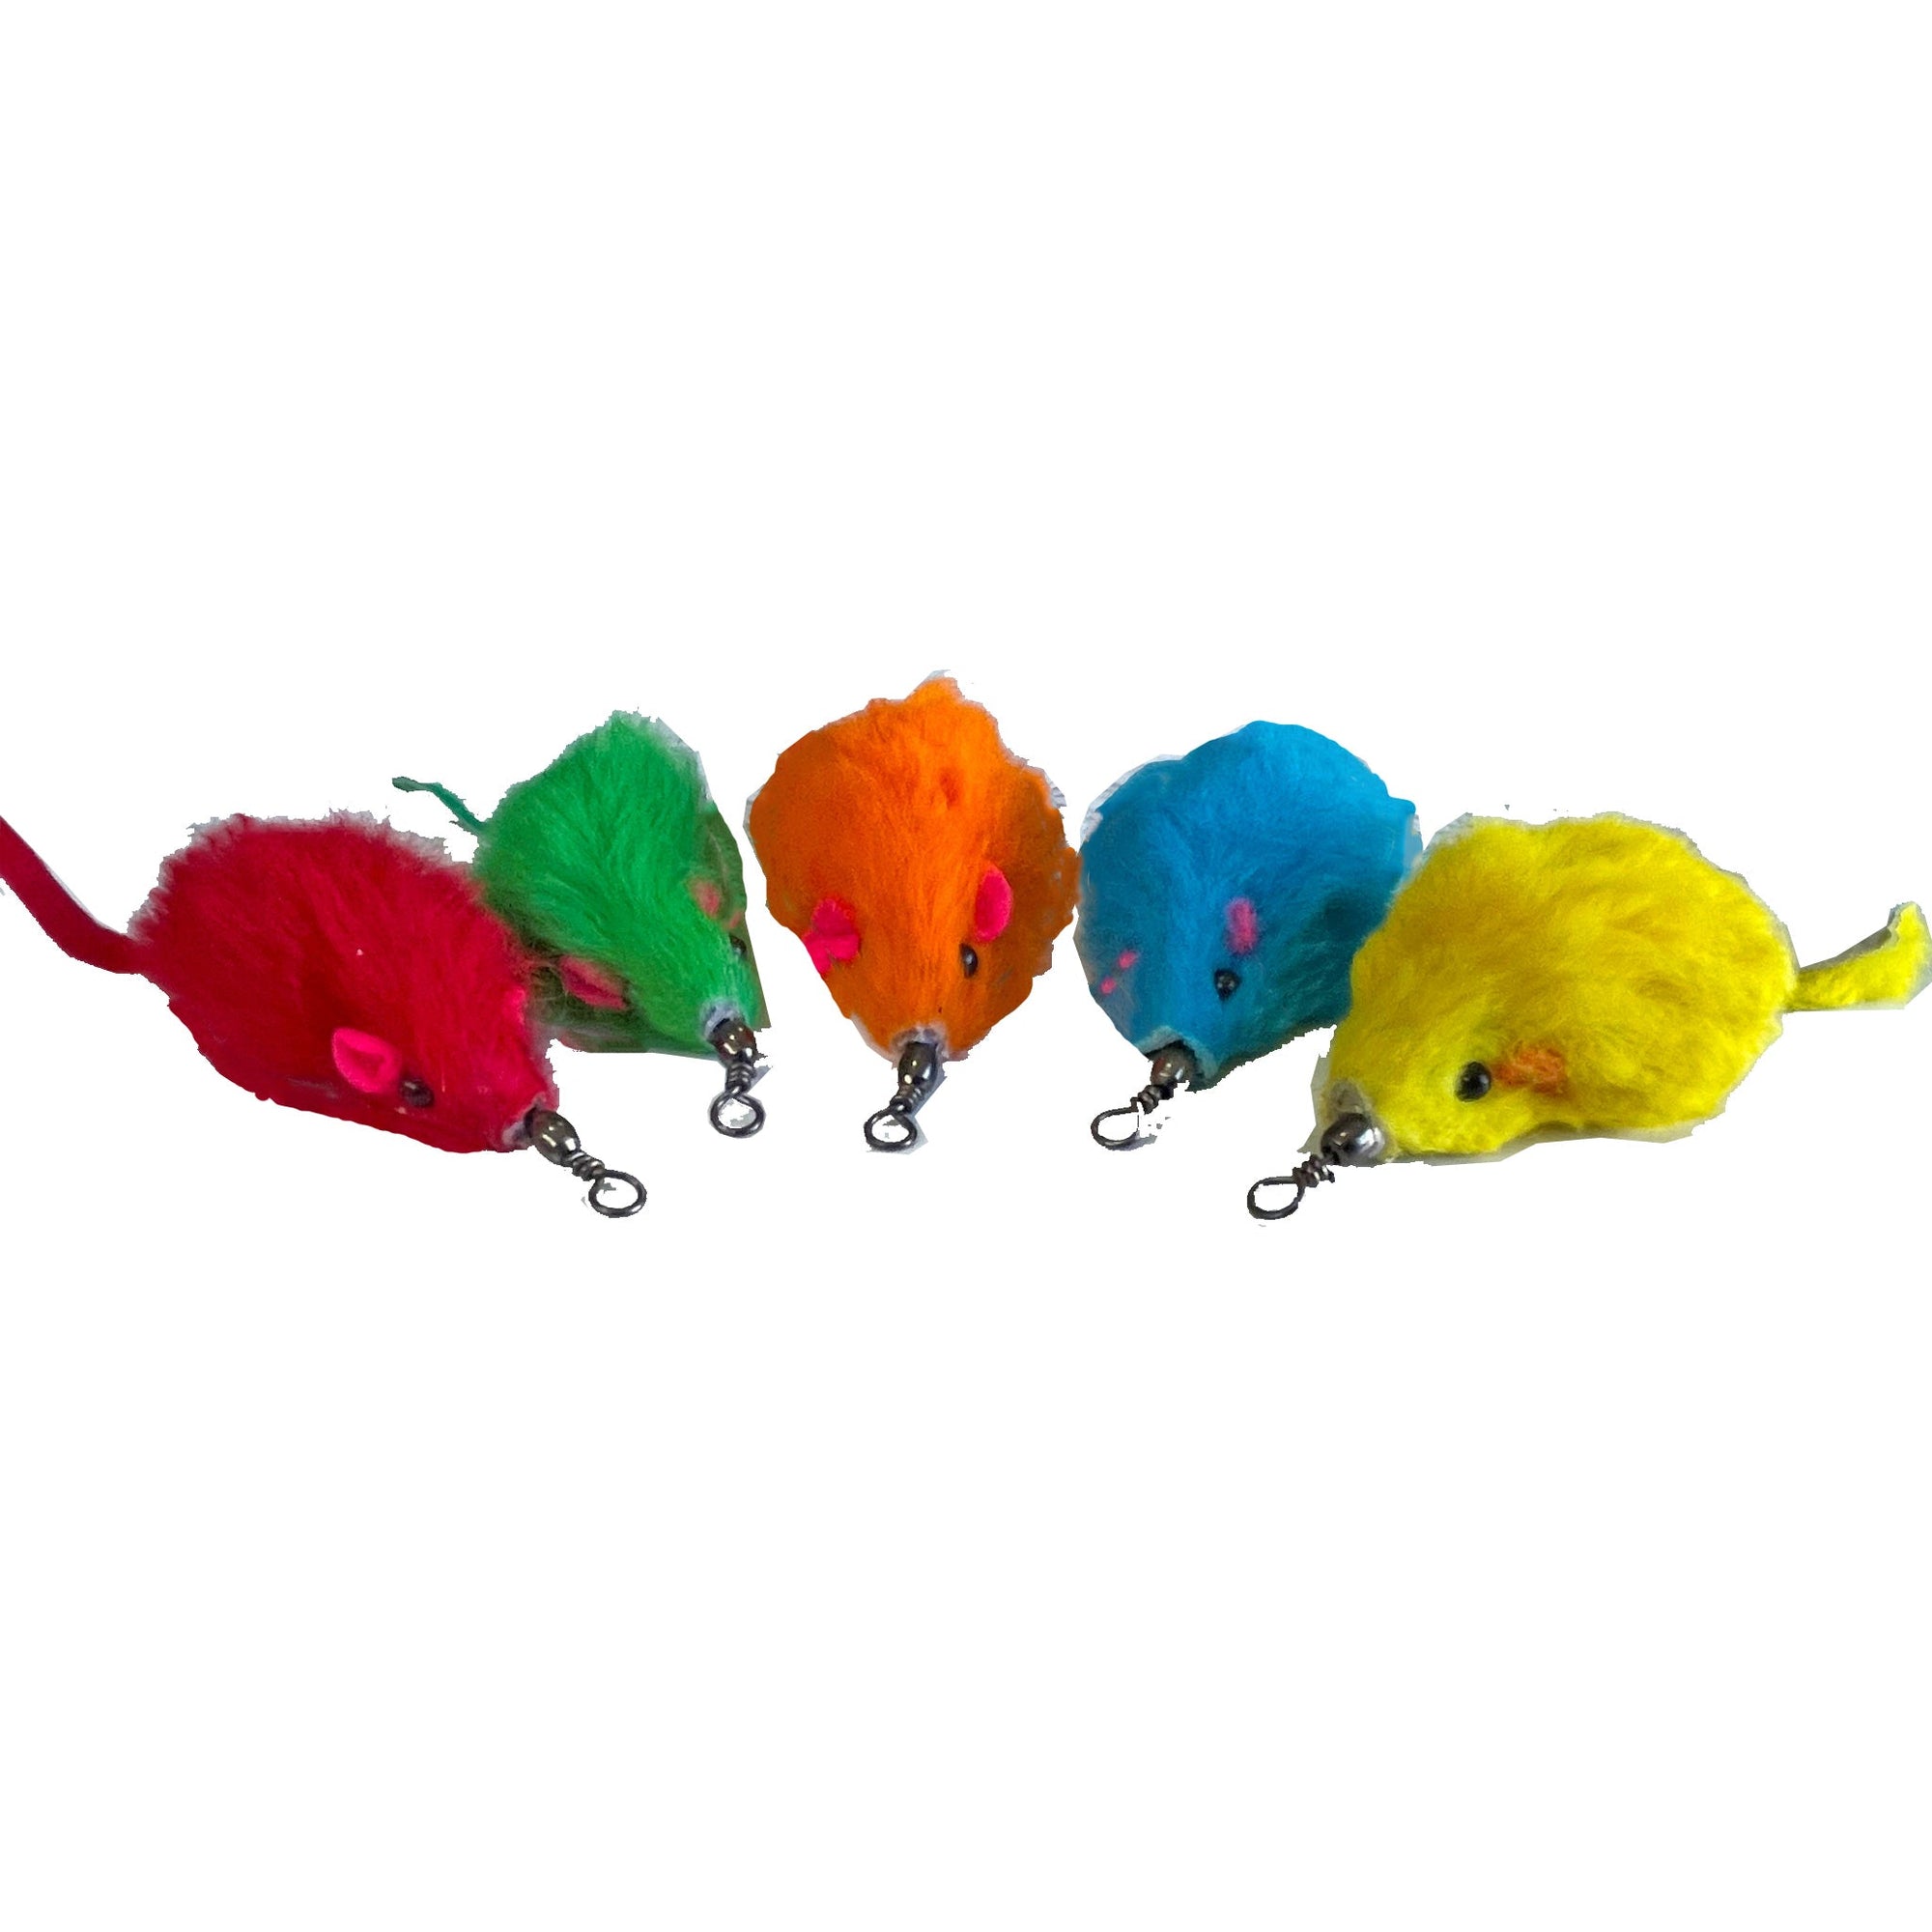 Katattack Mice Attachment Pack of 3 - ComfyPet Products